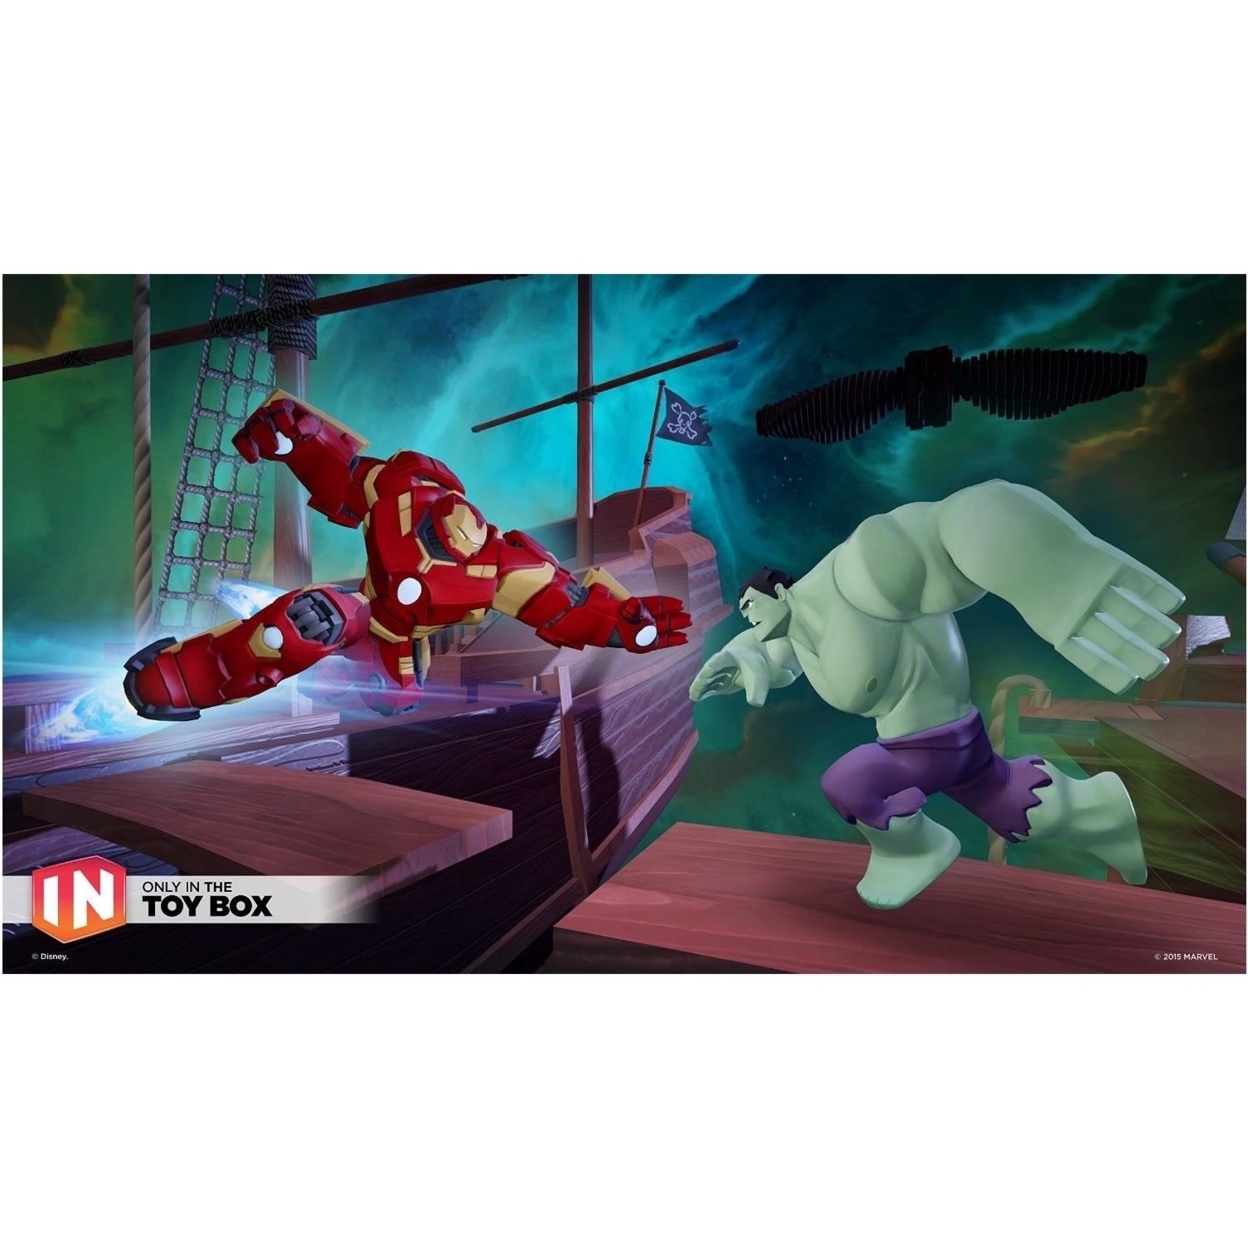 Disney Infinity 3.0 Edition Starter Pack (Xbox 360) - image 5 of 7